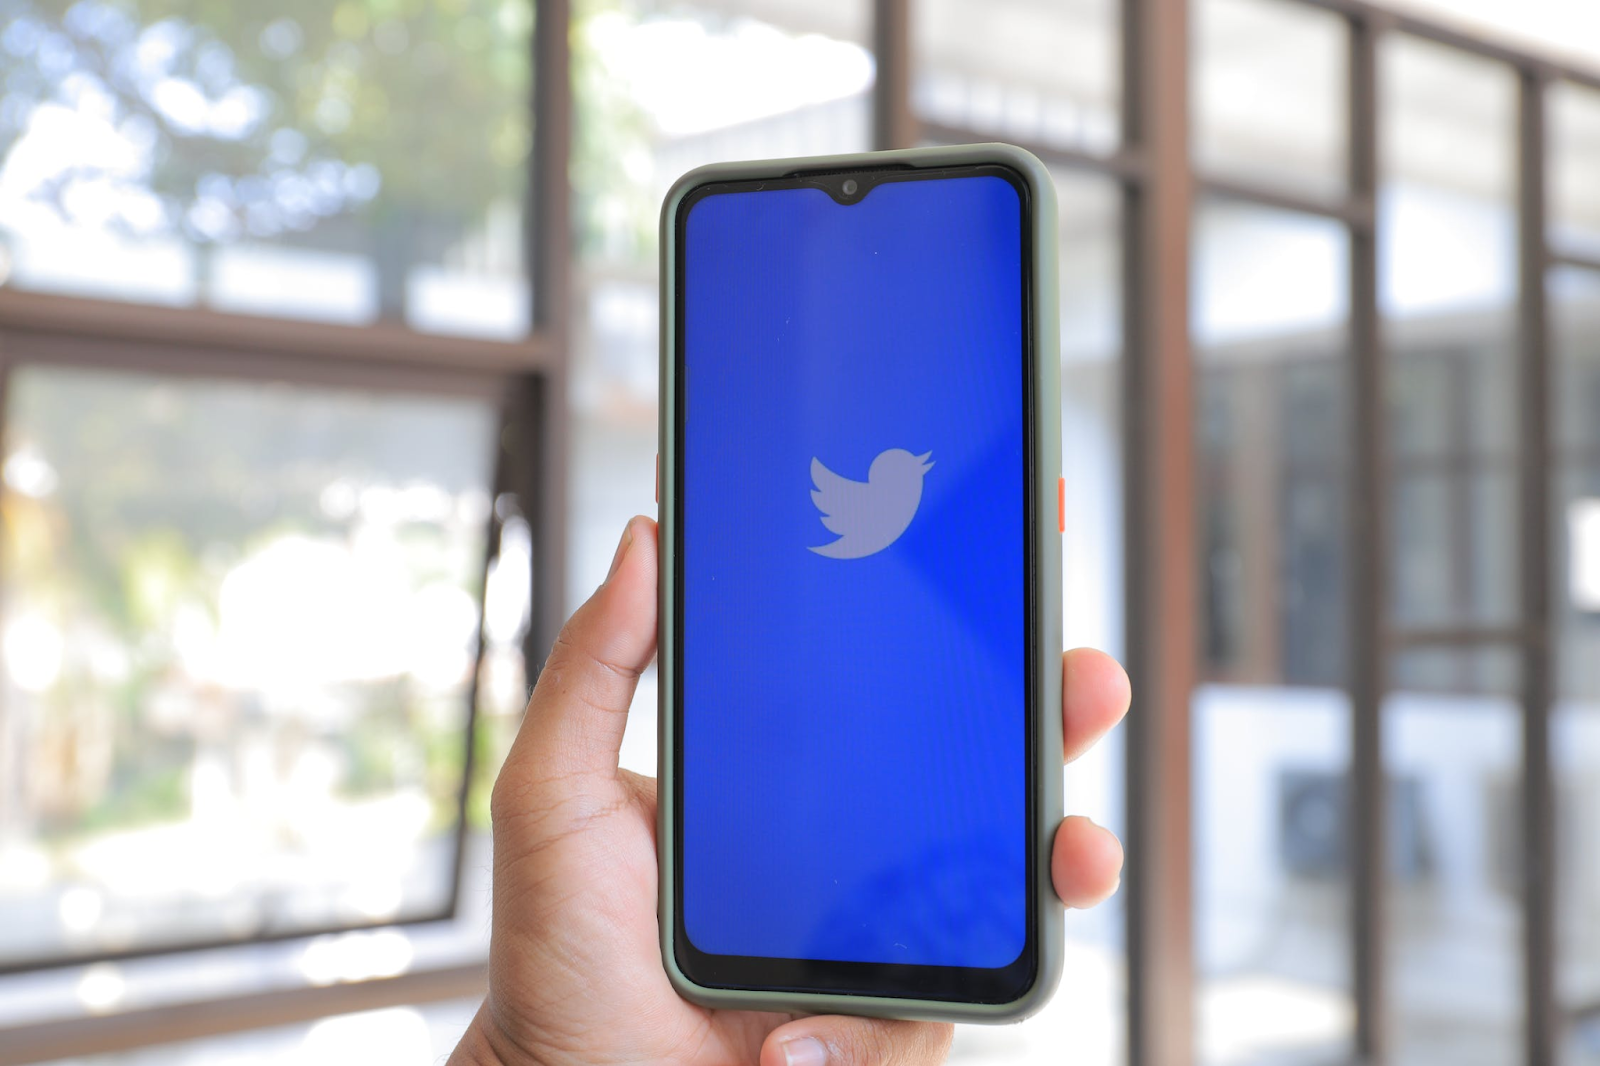 Can X, Formerly Known as Twitter, Become a Super App, and What Does it Mean?